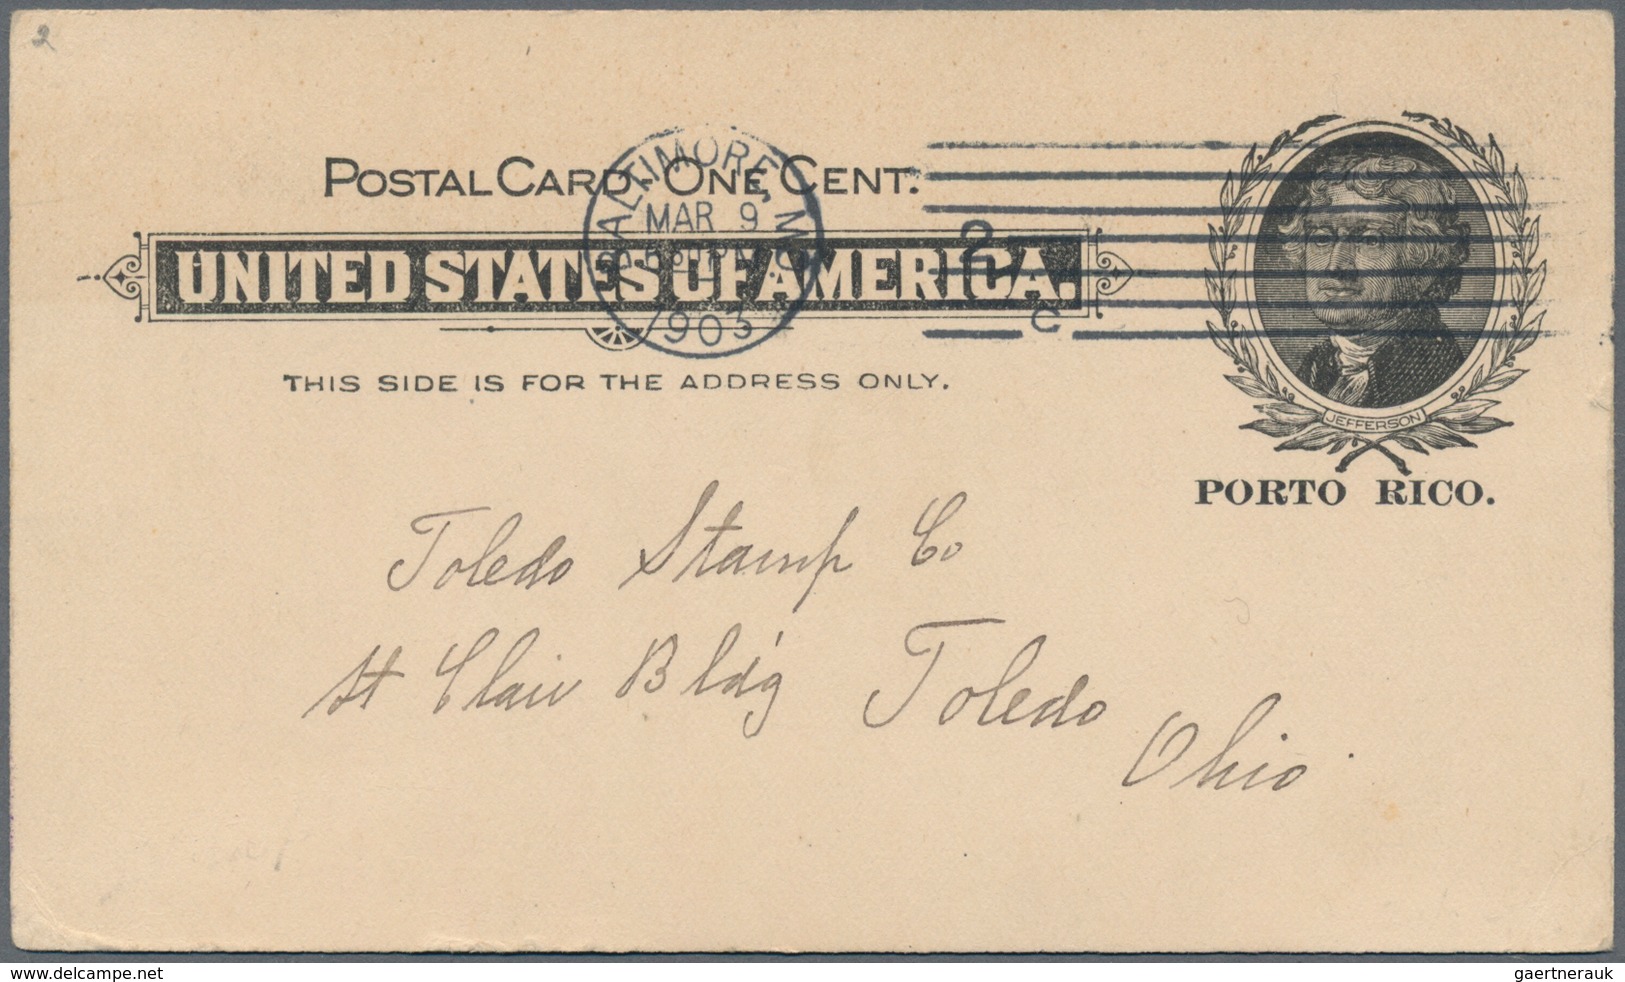 Puerto Rico: 1878/99 Collection Of Ca. 76 Unused Postal Stationery Cards Incl. One Used Item And Som - Puerto Rico